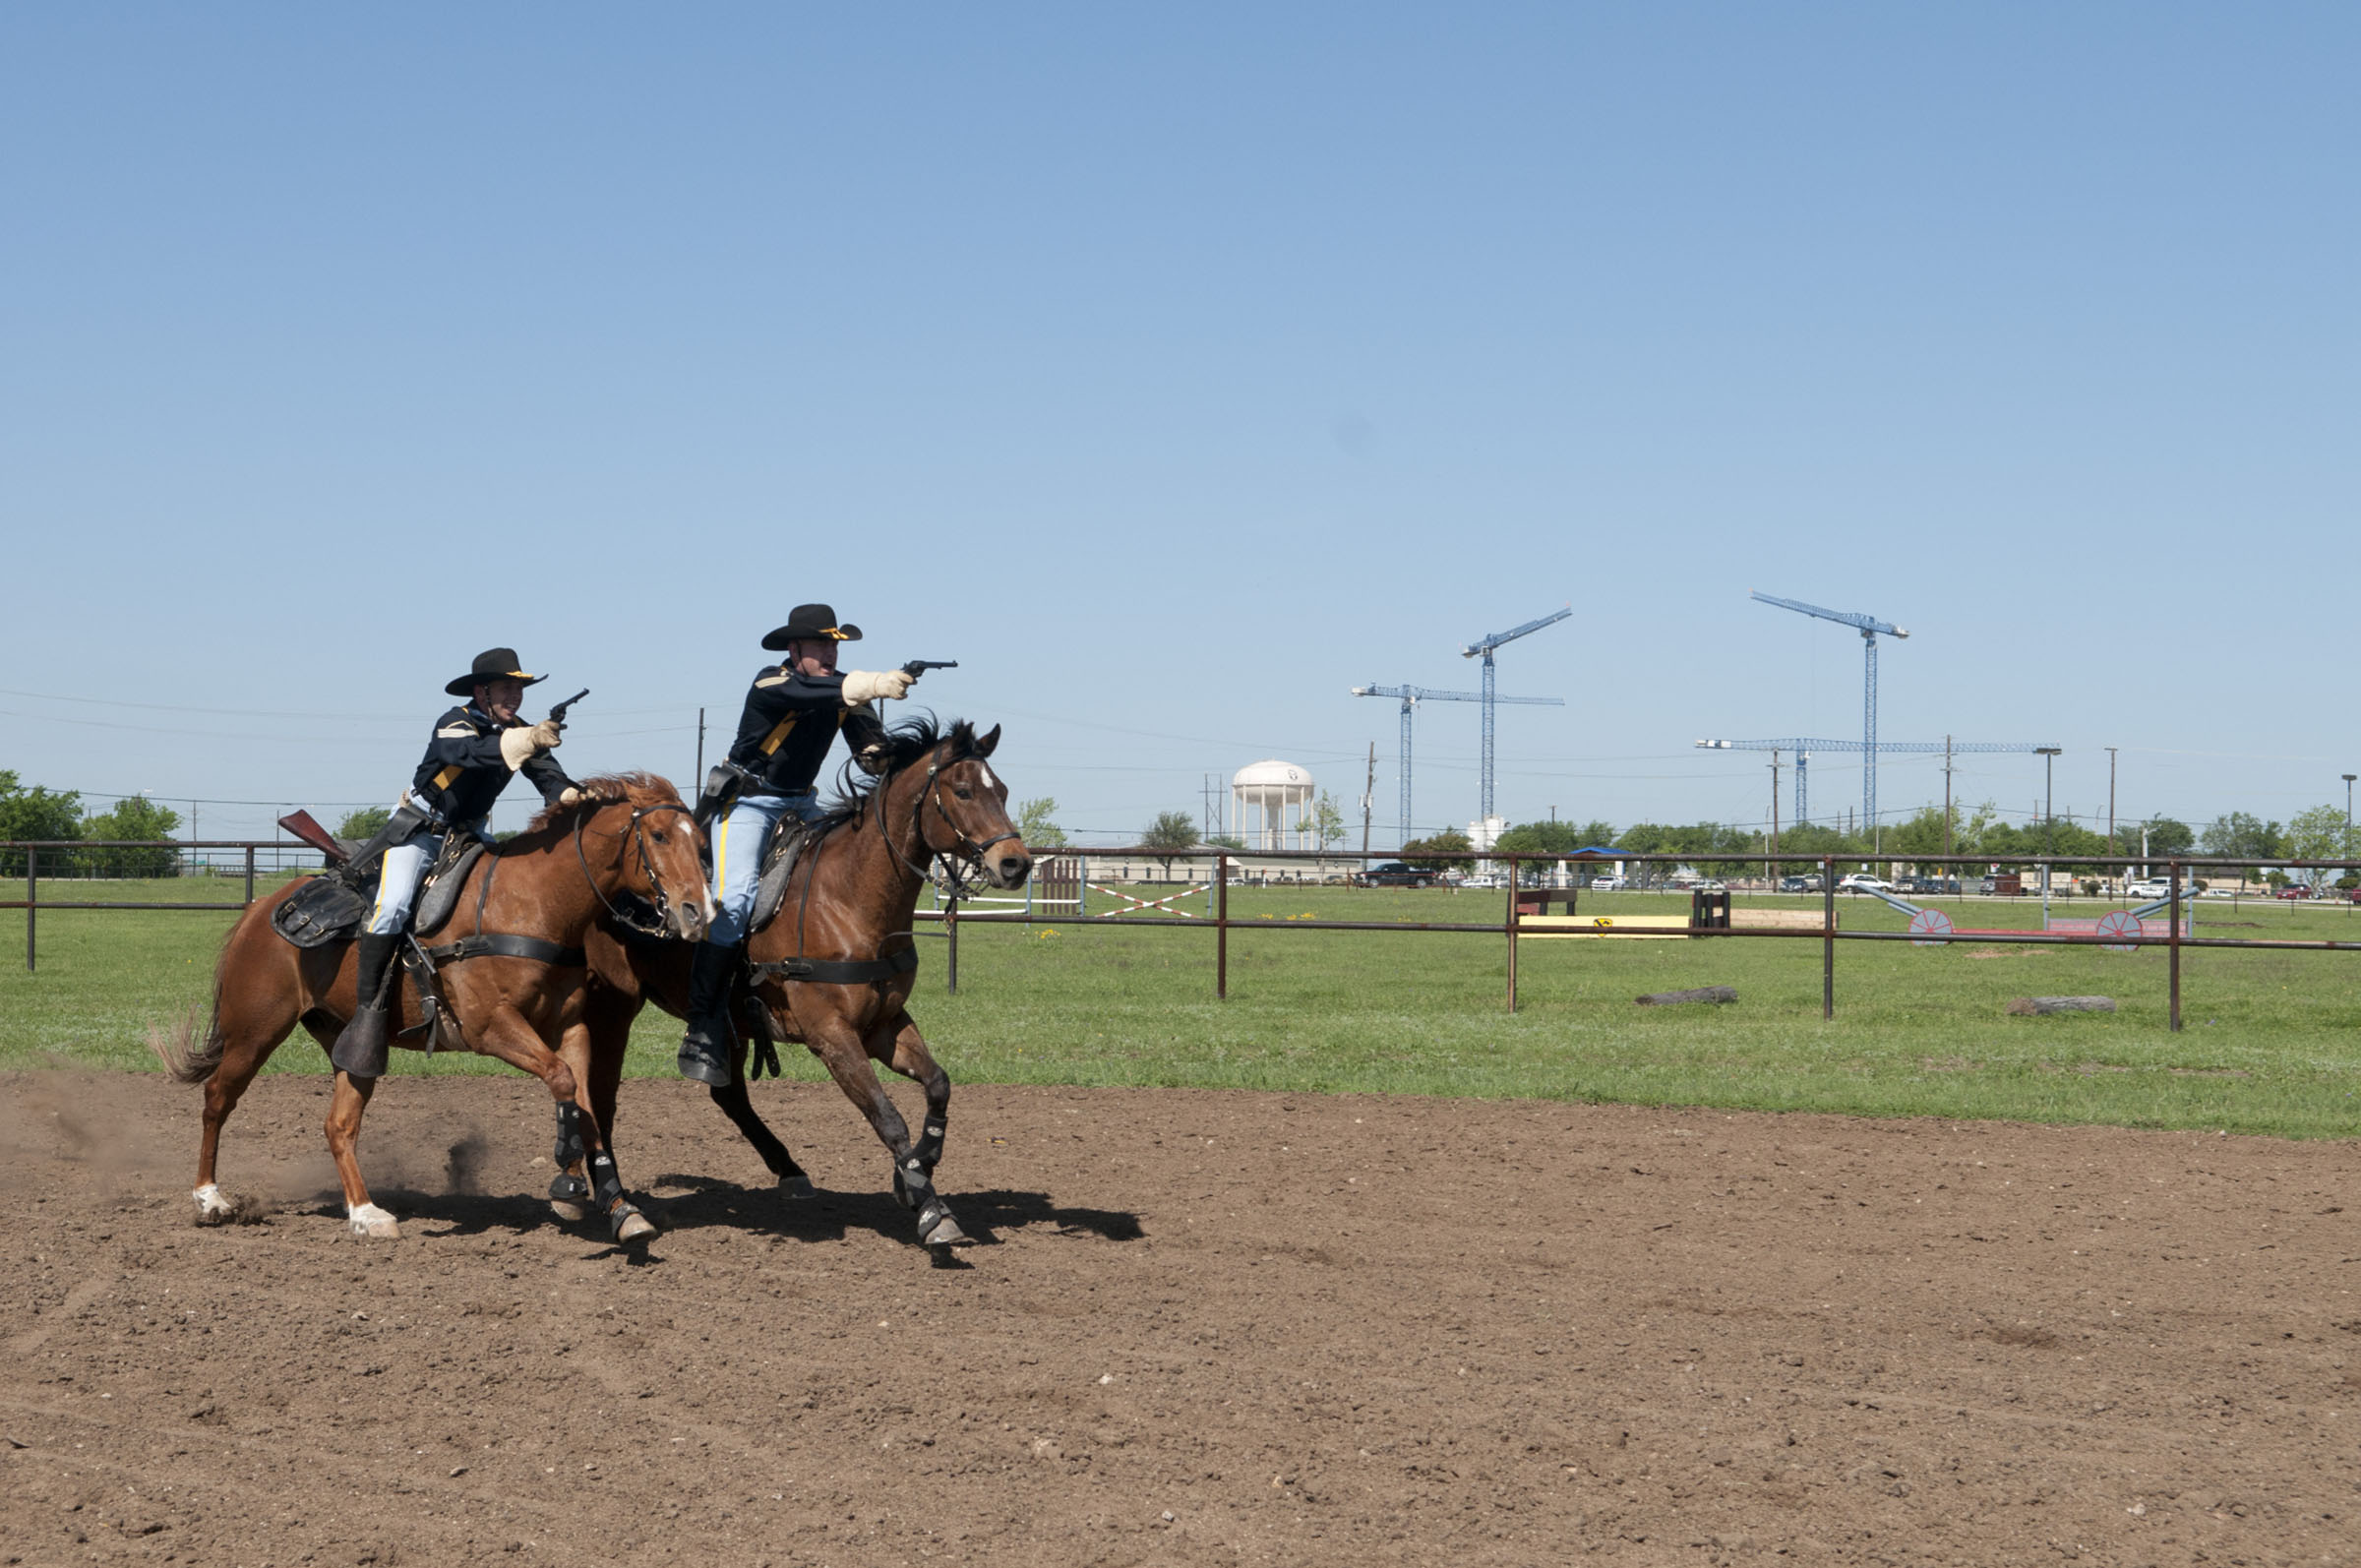 Two people ride on horseback on a dirt track while pointing revolvers in front of them.